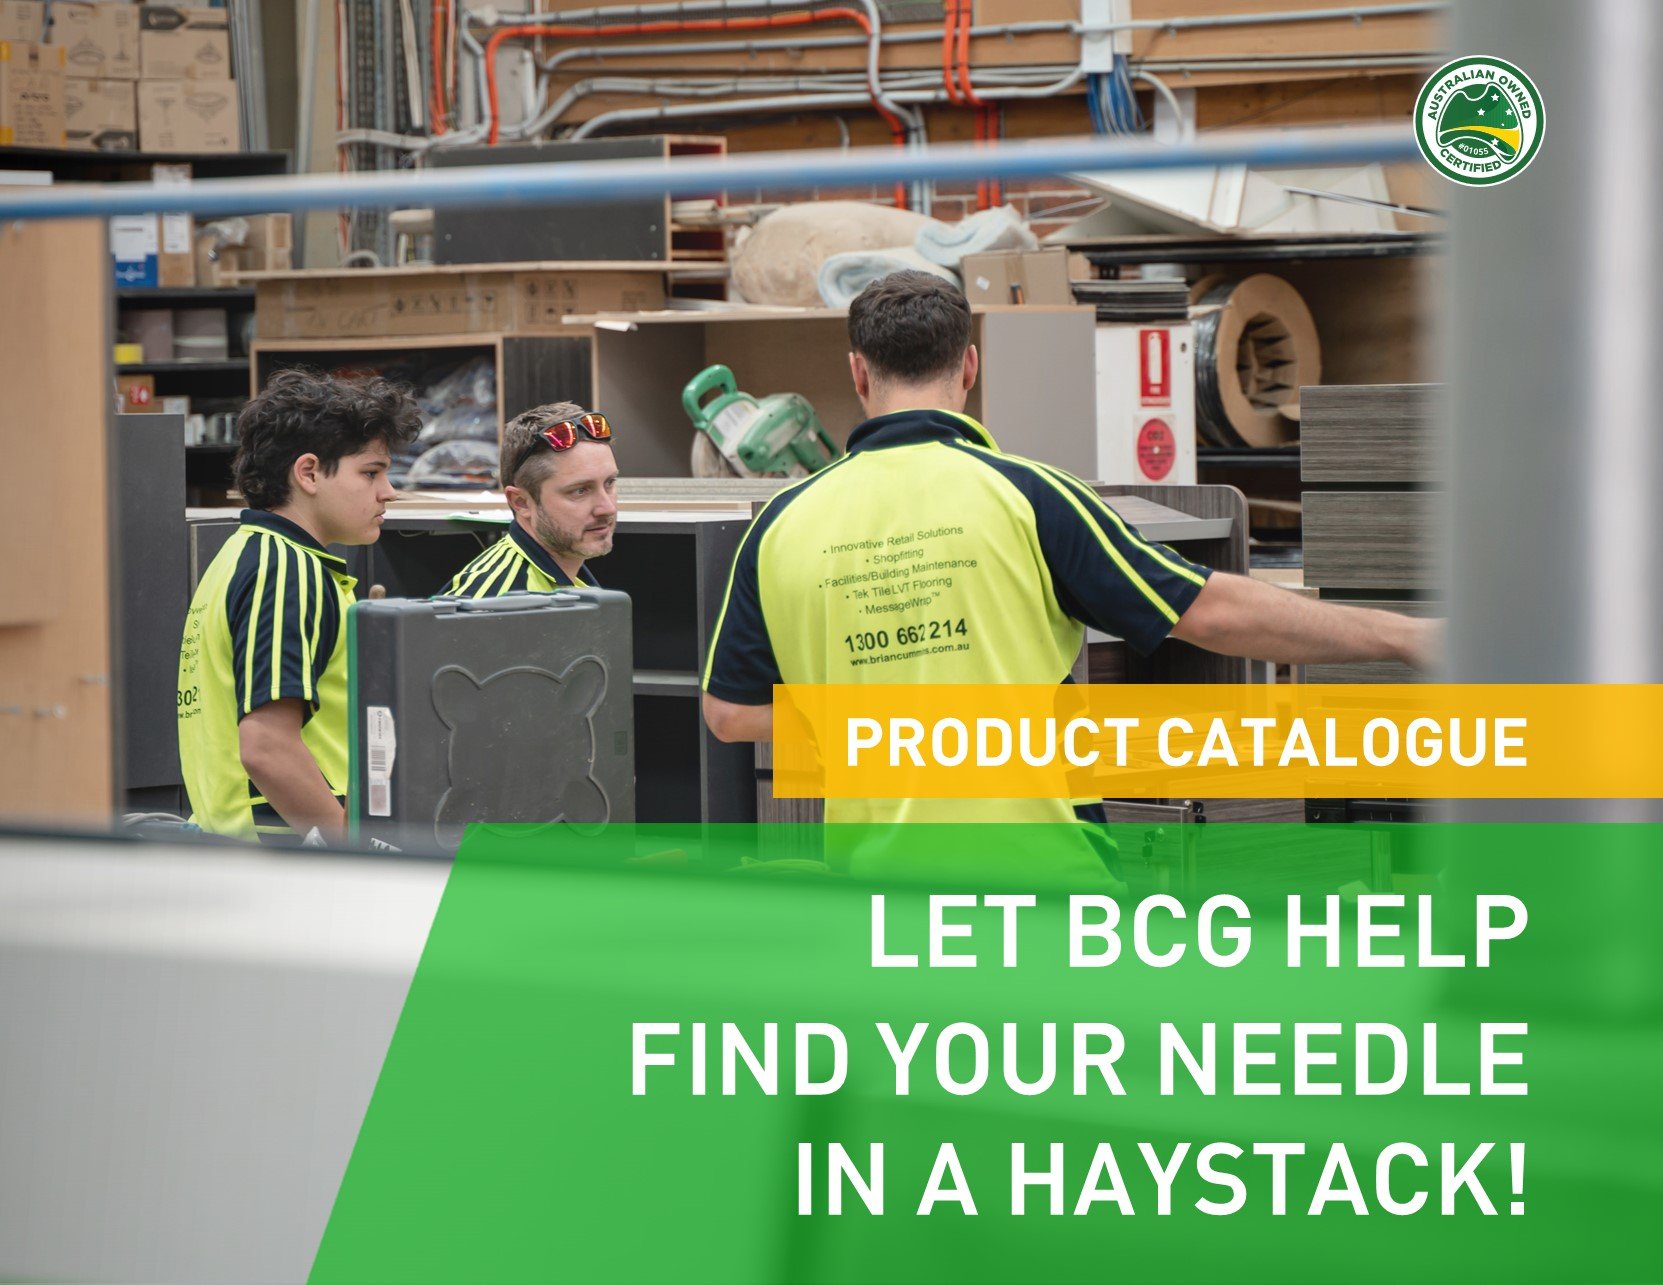 Let BCG Help Find Your Needle in a Haystack!